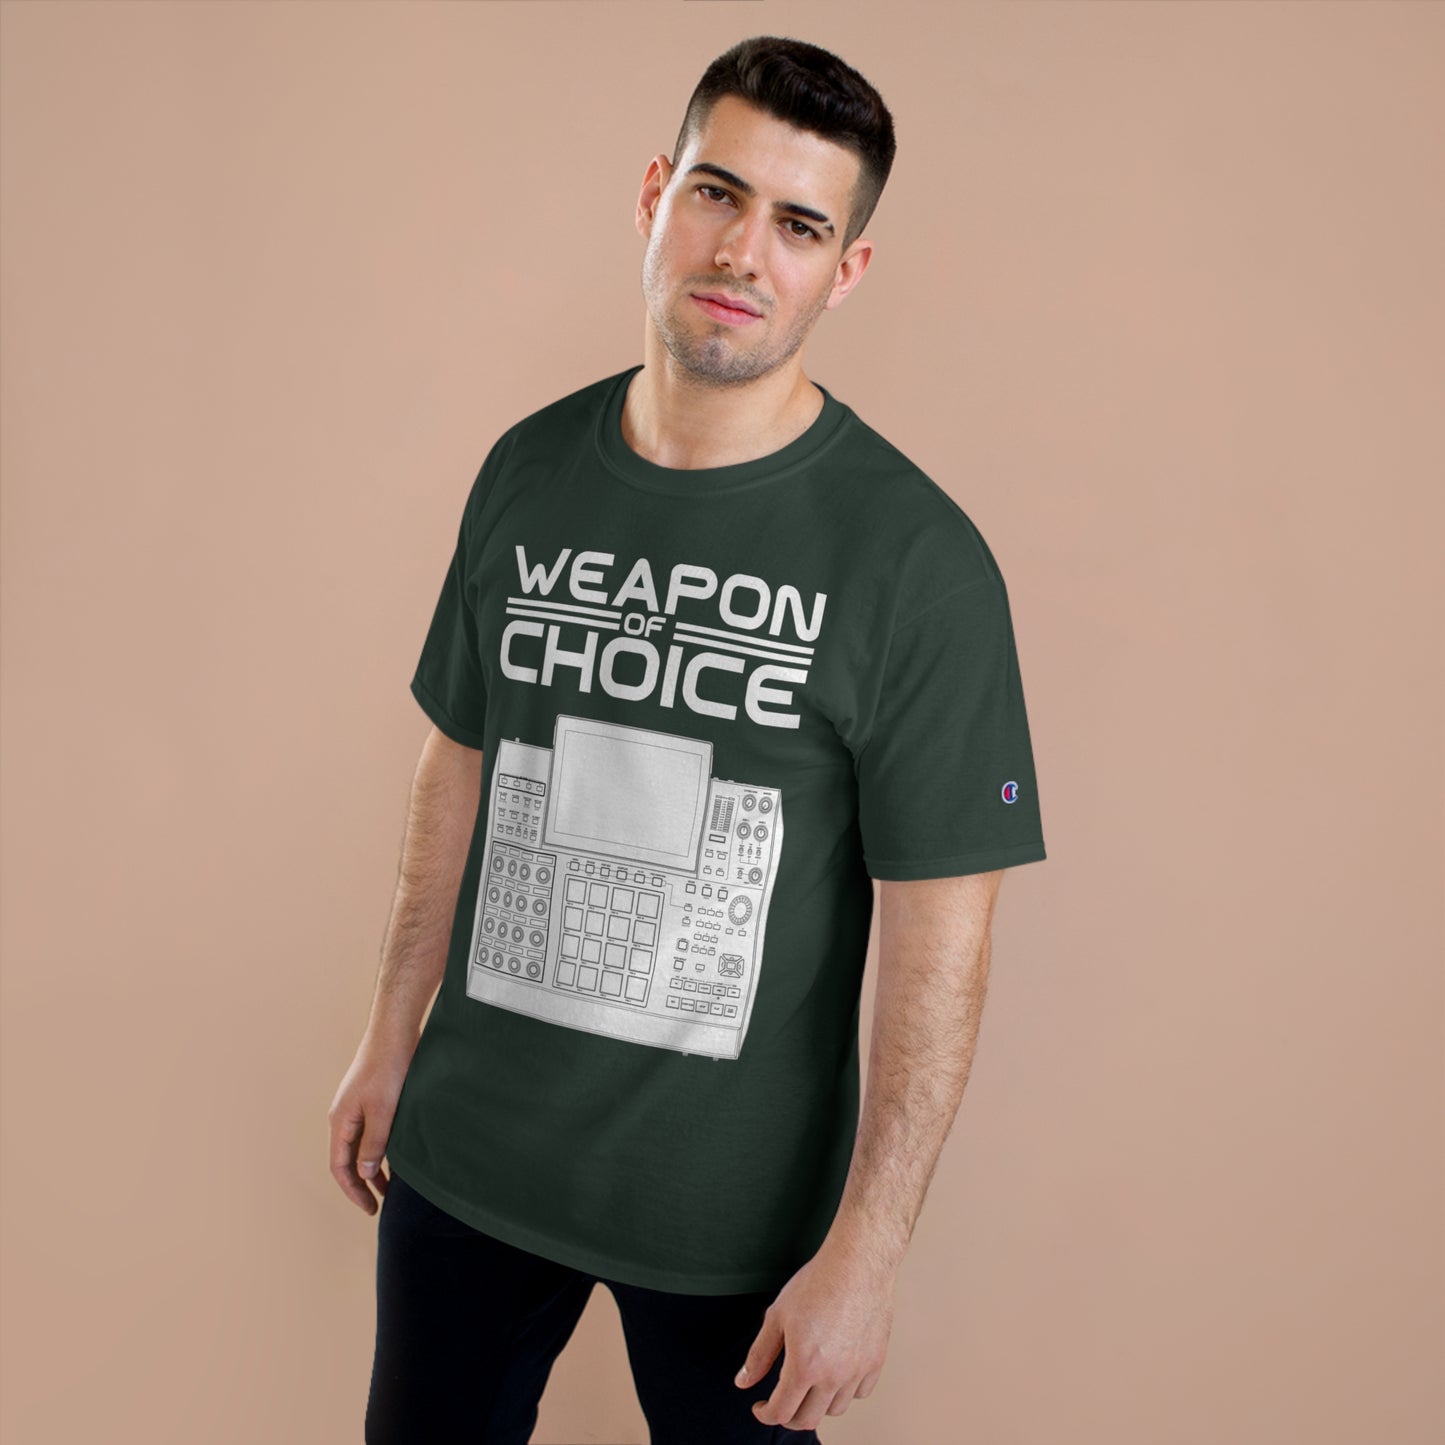 Weapon of Choice X or XSE Champion T-Shirt